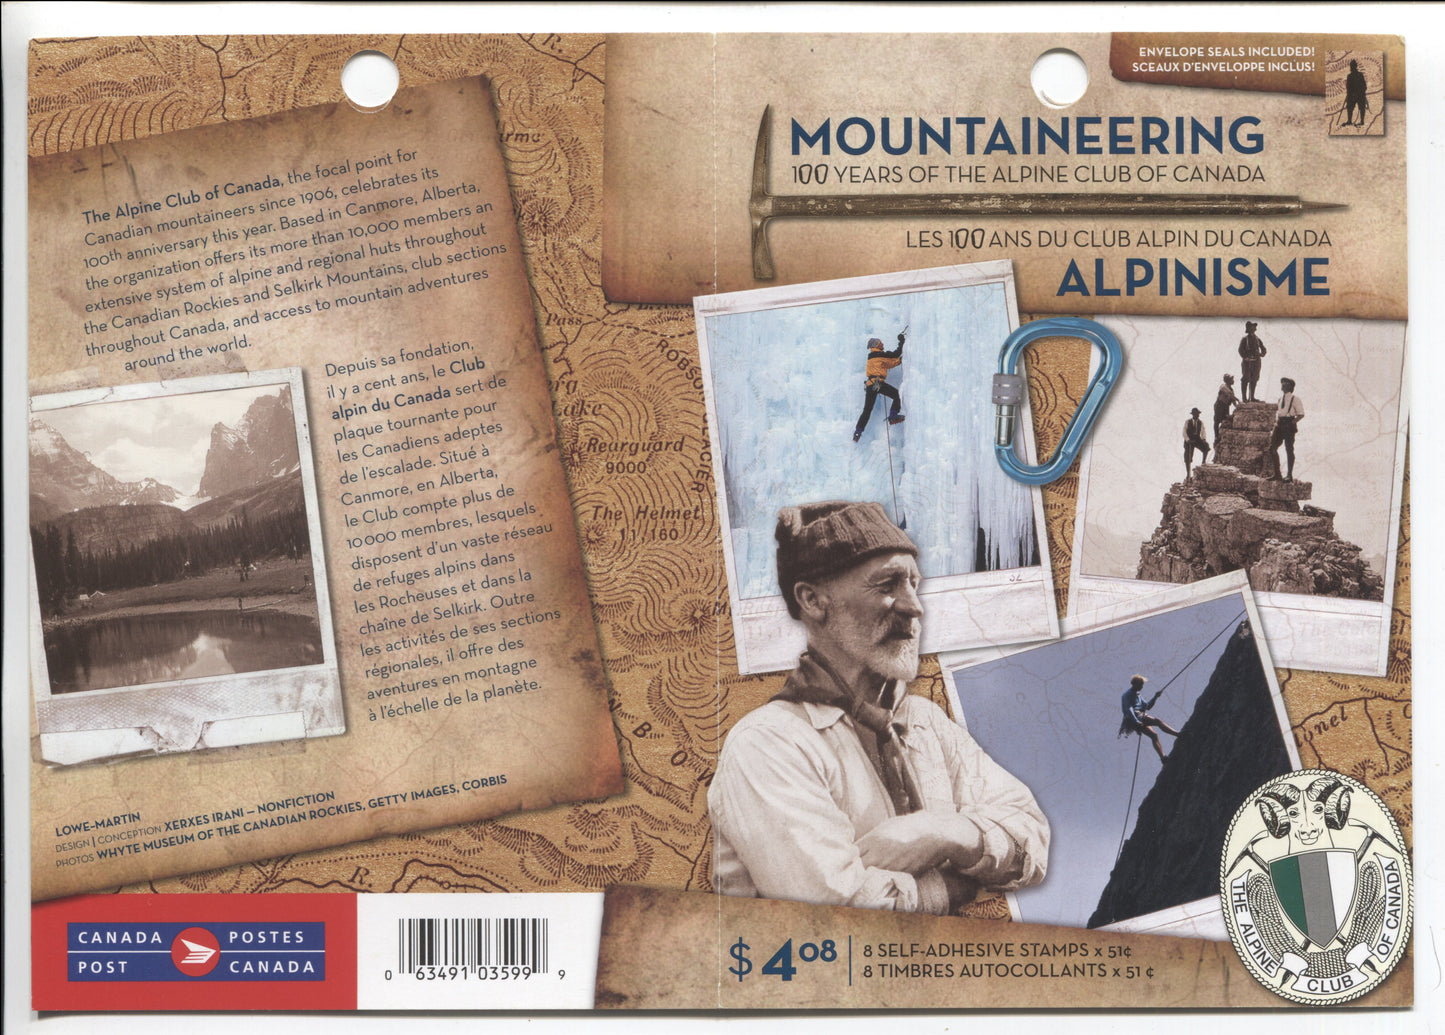 Canada #BK332 2006 Mountaineering Issue, Complete $4.08 Booklet, Tullis Russell Coatings Paper, Dead Paper, 4 mm GT-4 Tagging